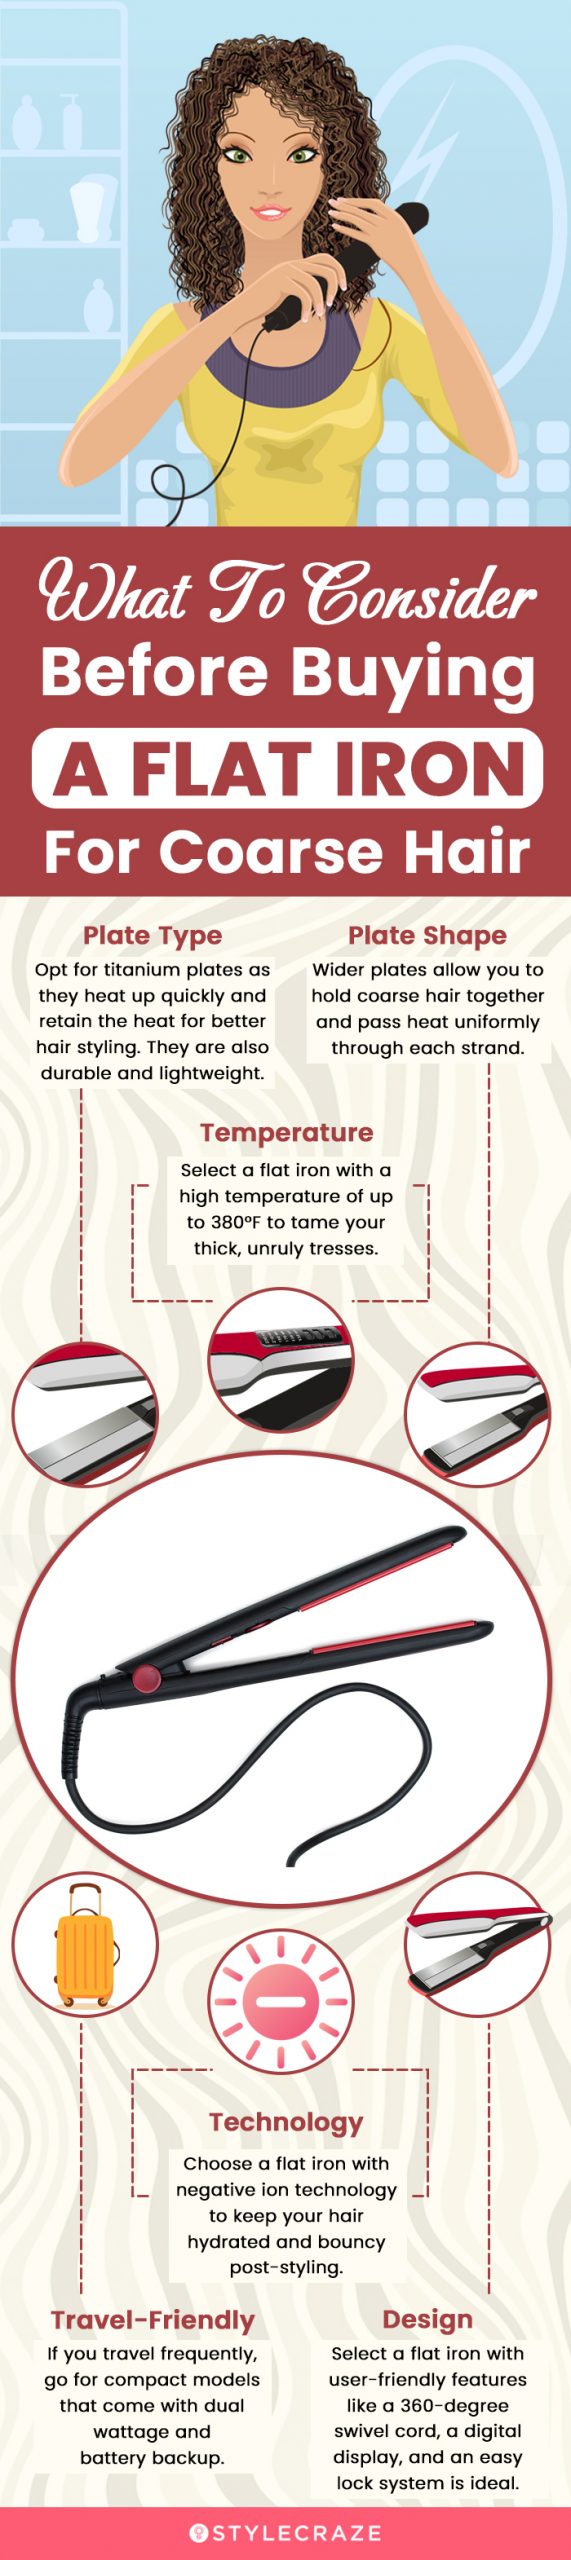 What To Consider Before Buying A Flat Iron For Coarse Hair  [infographic]